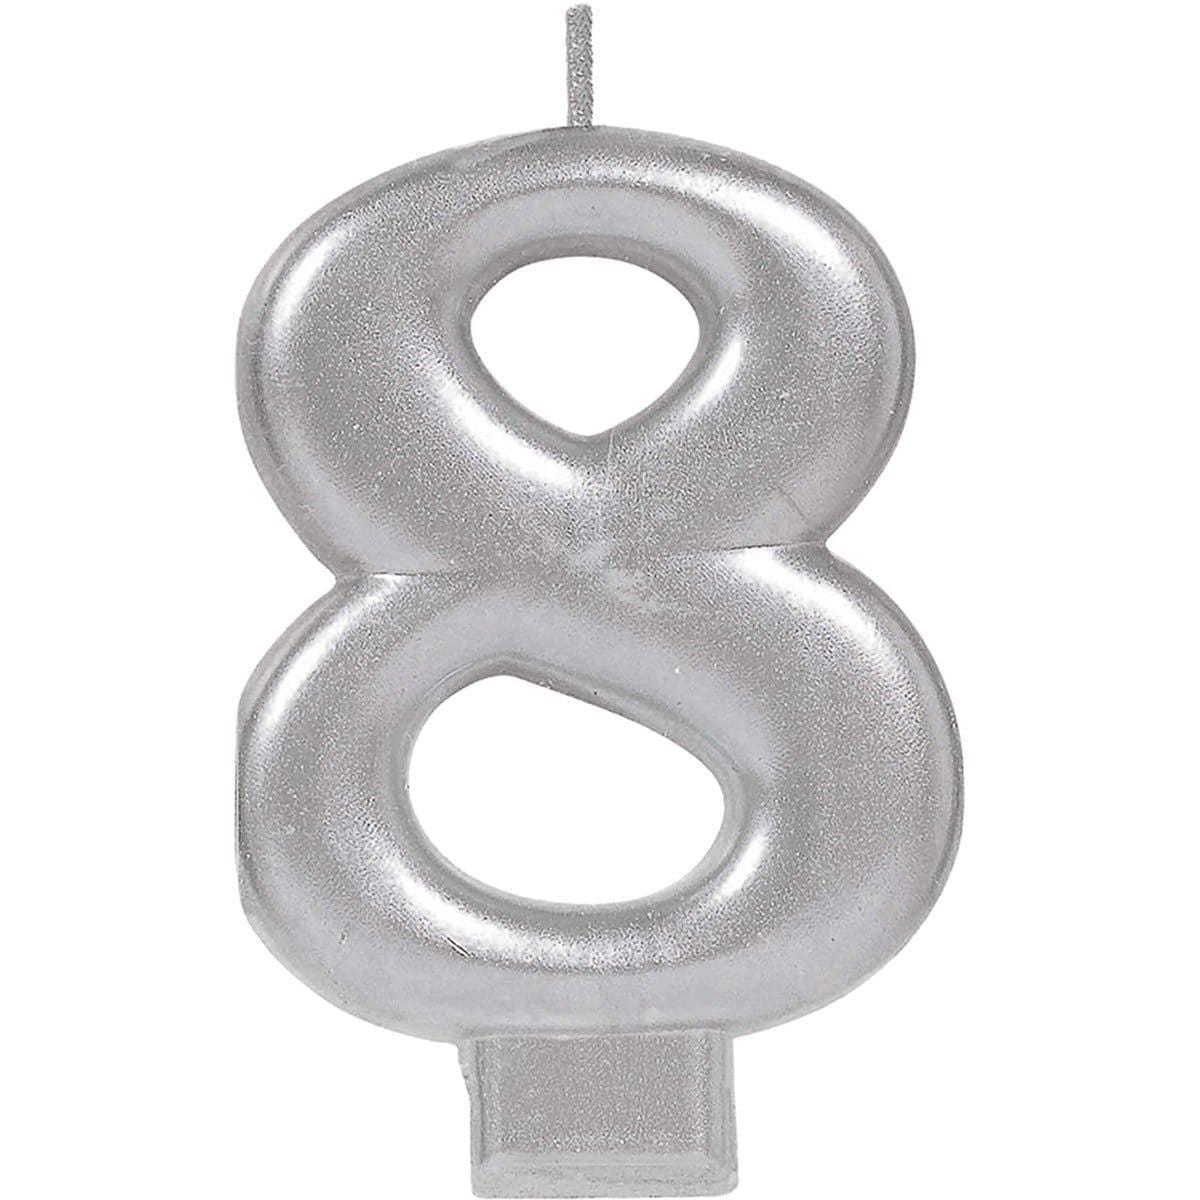 Buy Cake Supplies Metallic Numeral Candle #8 - Silver sold at Party Expert